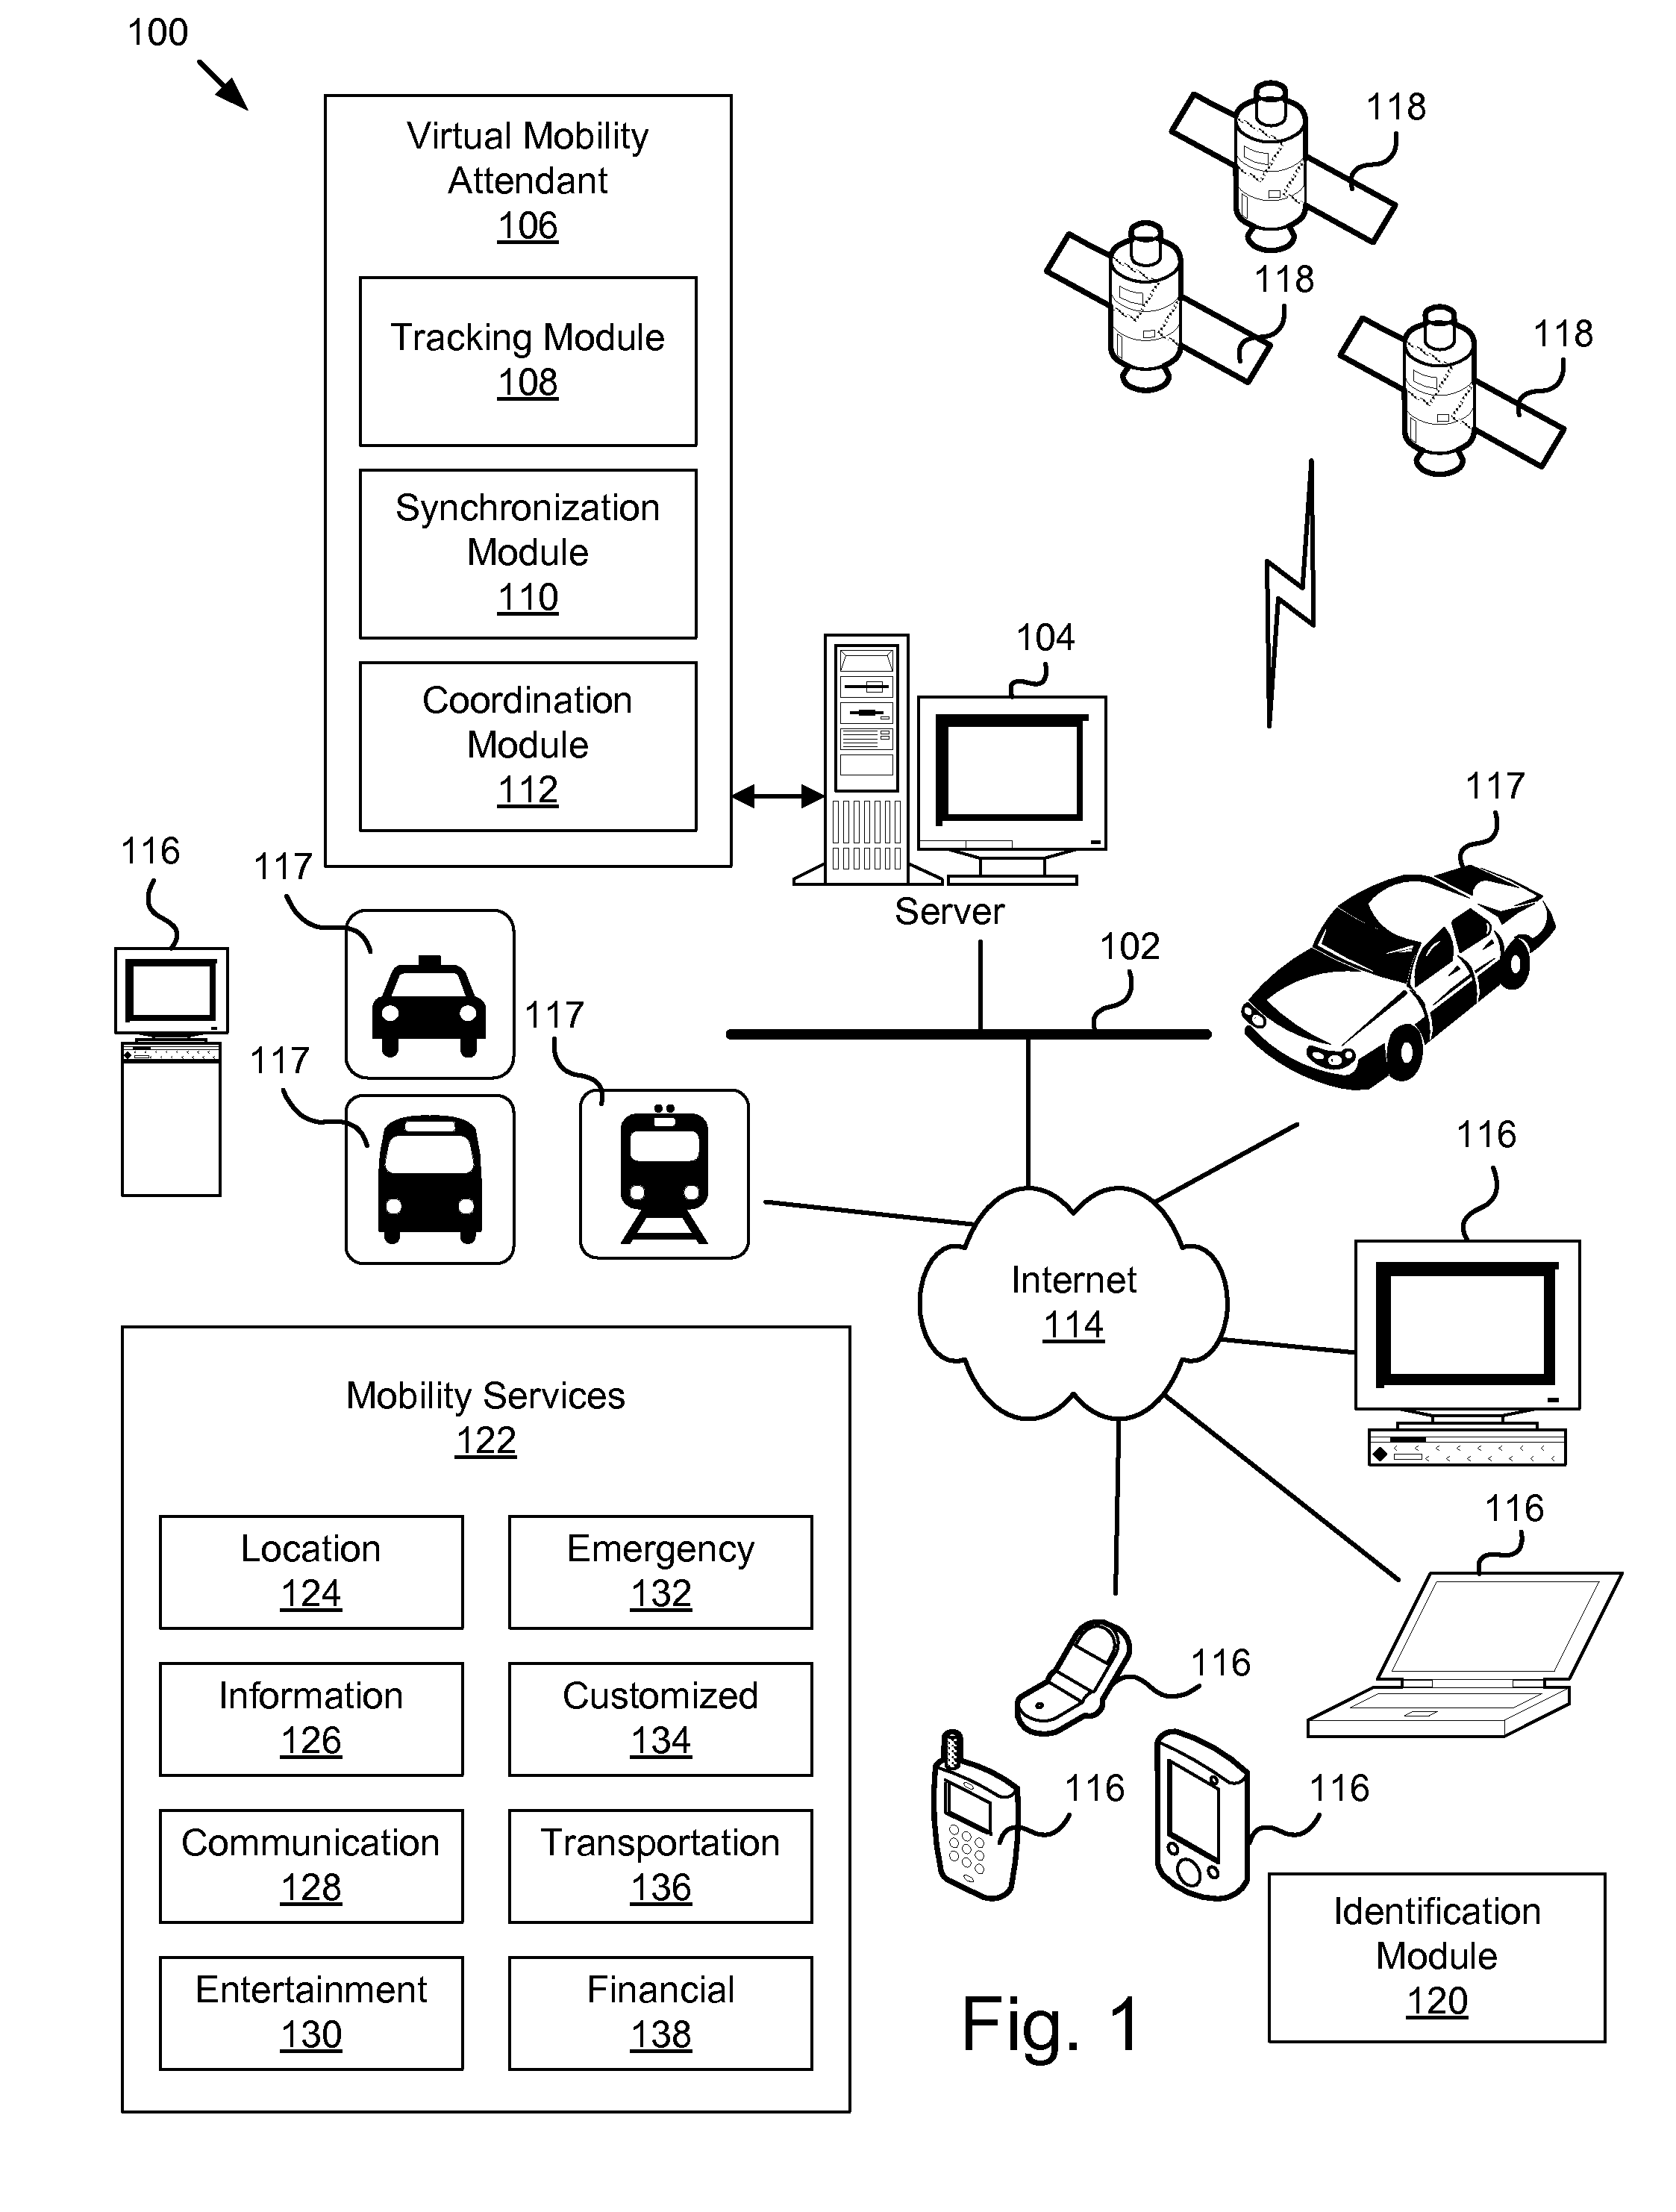 System and method for coordinating customized mobility services through a network